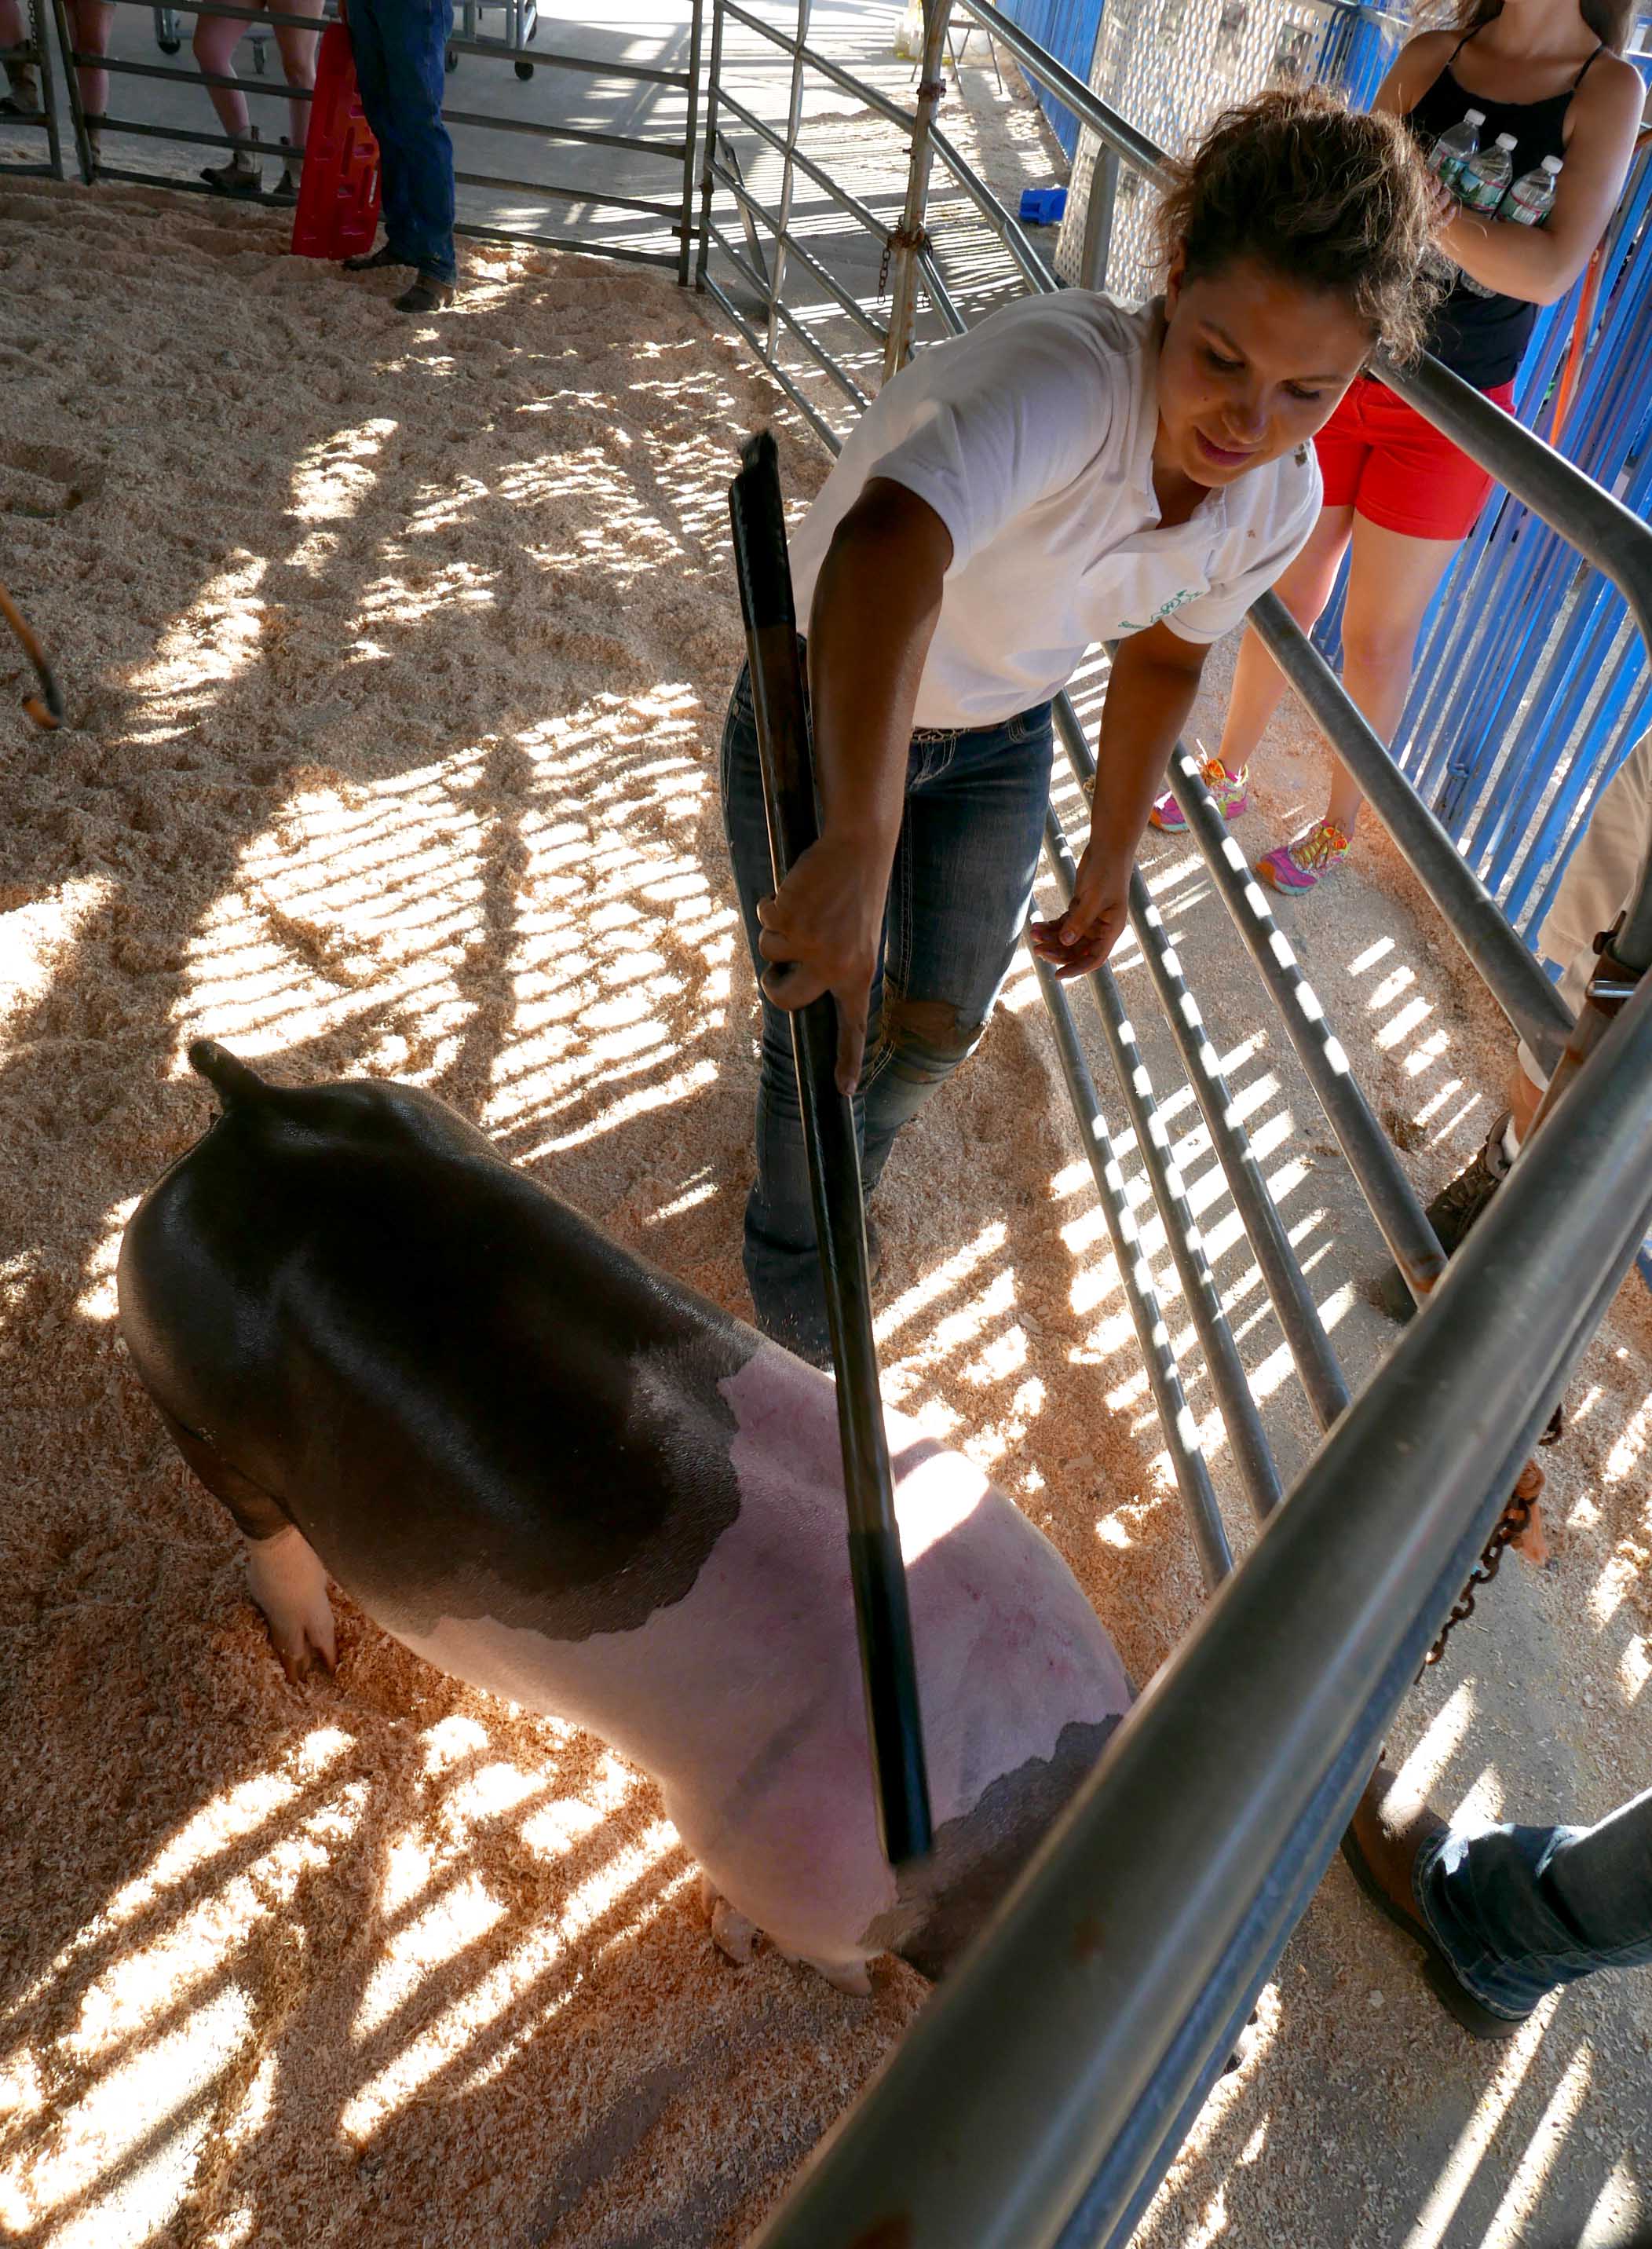 Girl showing pig at the fair